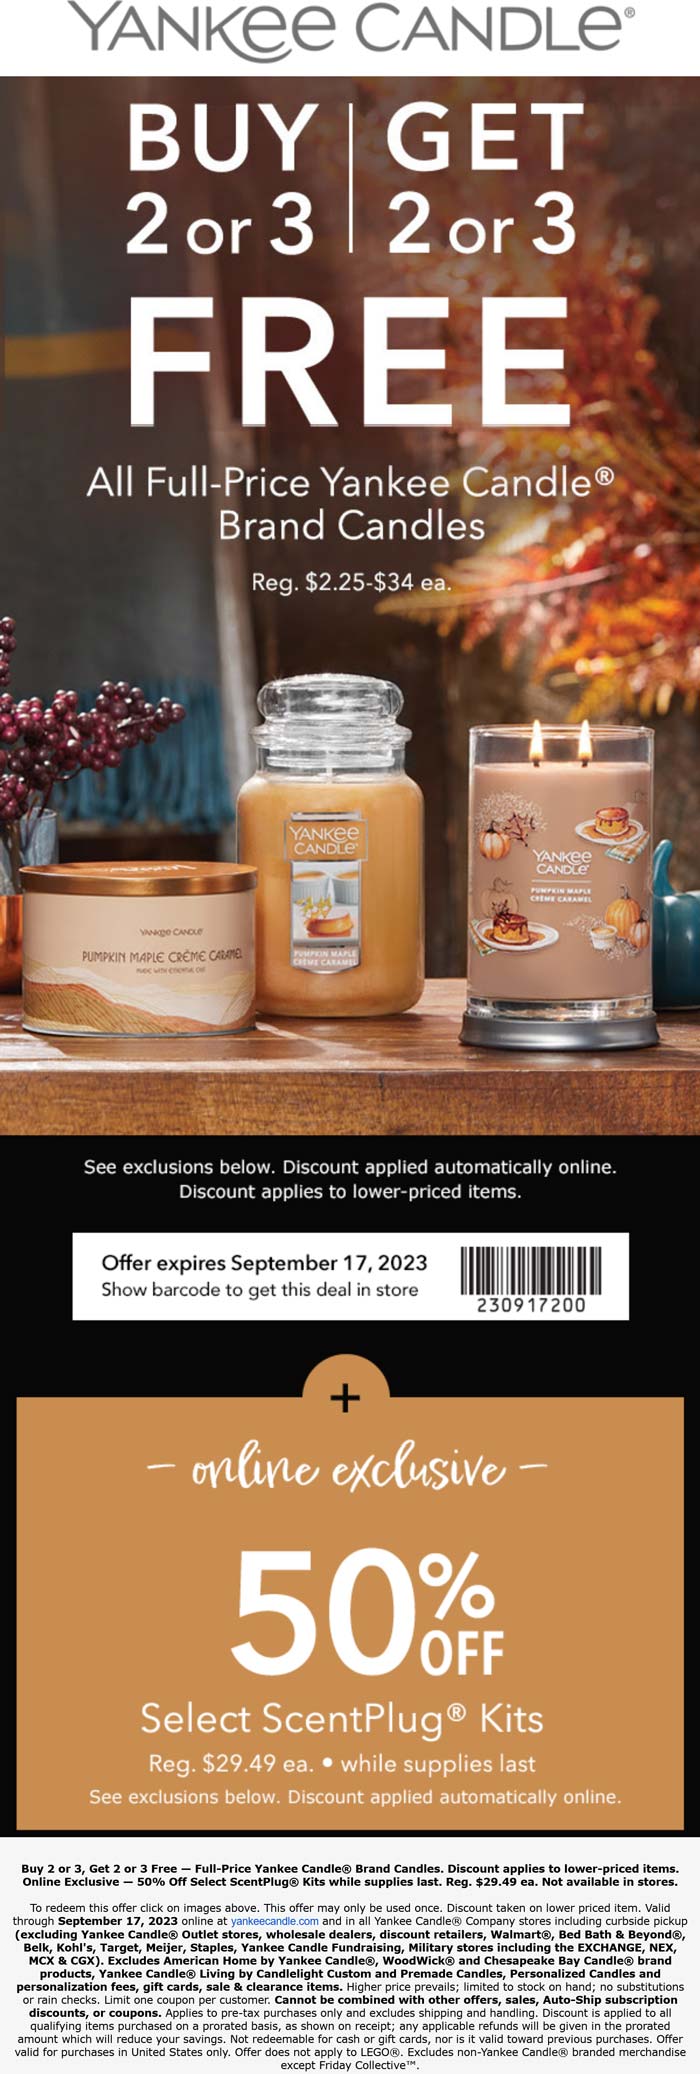 Yankee Candle stores Coupon  4-for-2 on all candles today at Yankee Candle, ditto online #yankeecandle 